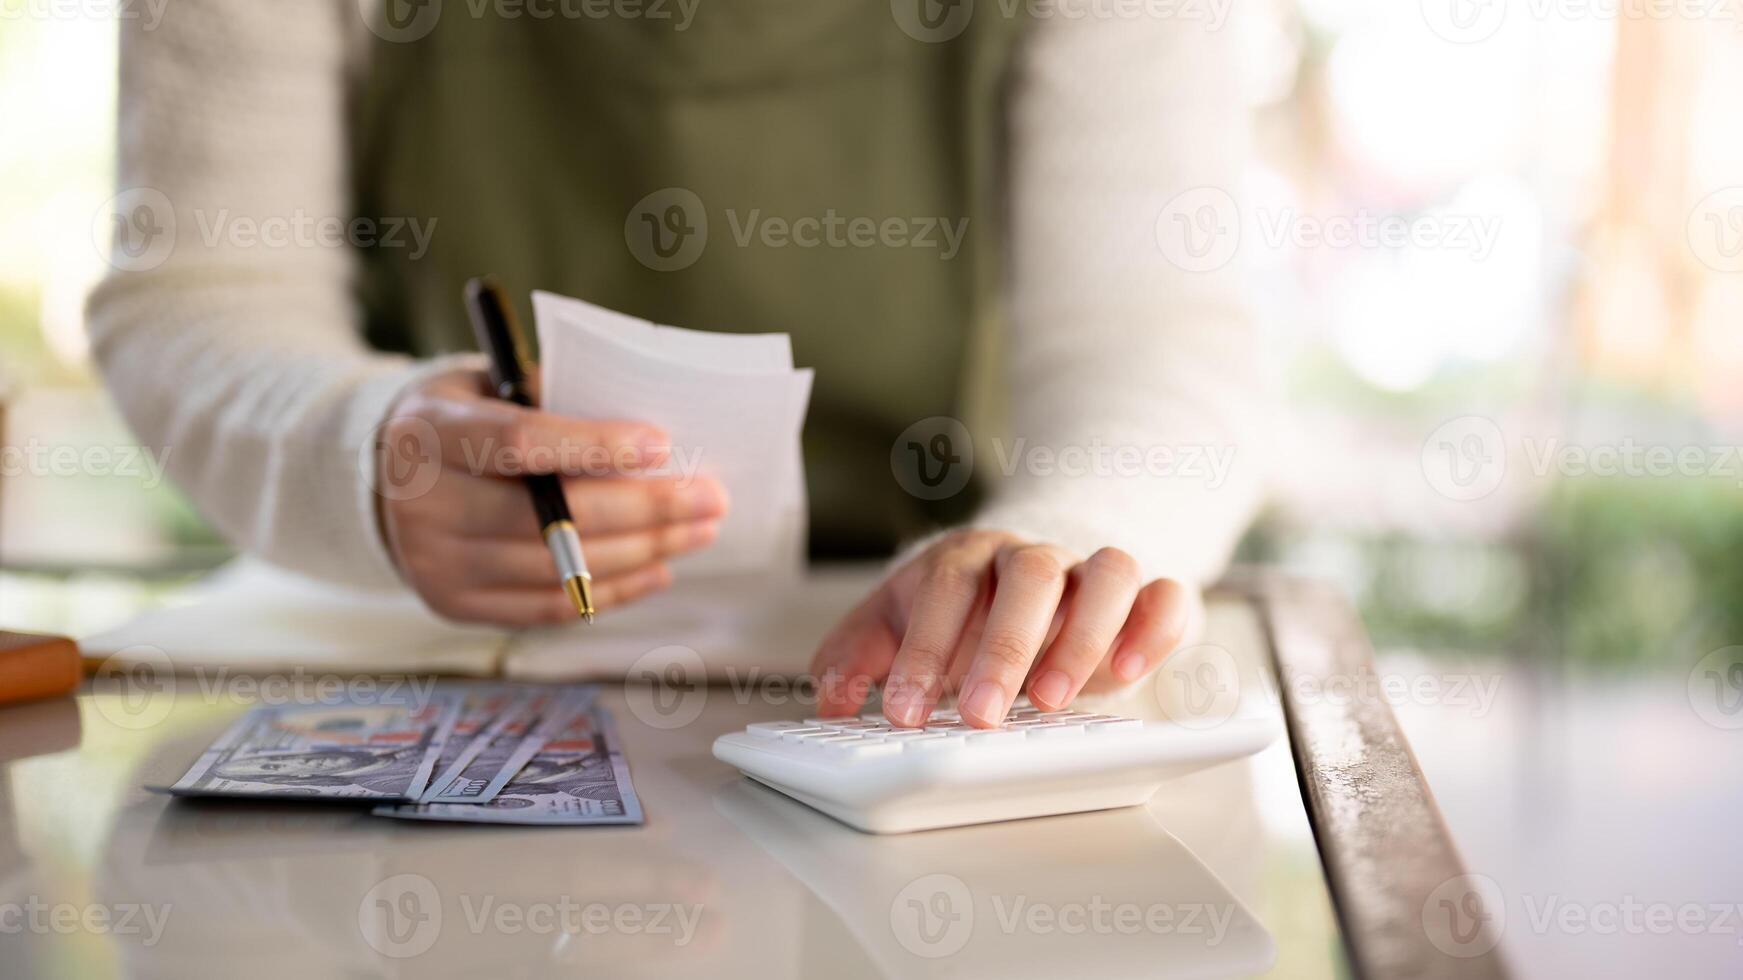 A female business owner using a calculator, reviewing receipts, and managing her shop's finances. photo